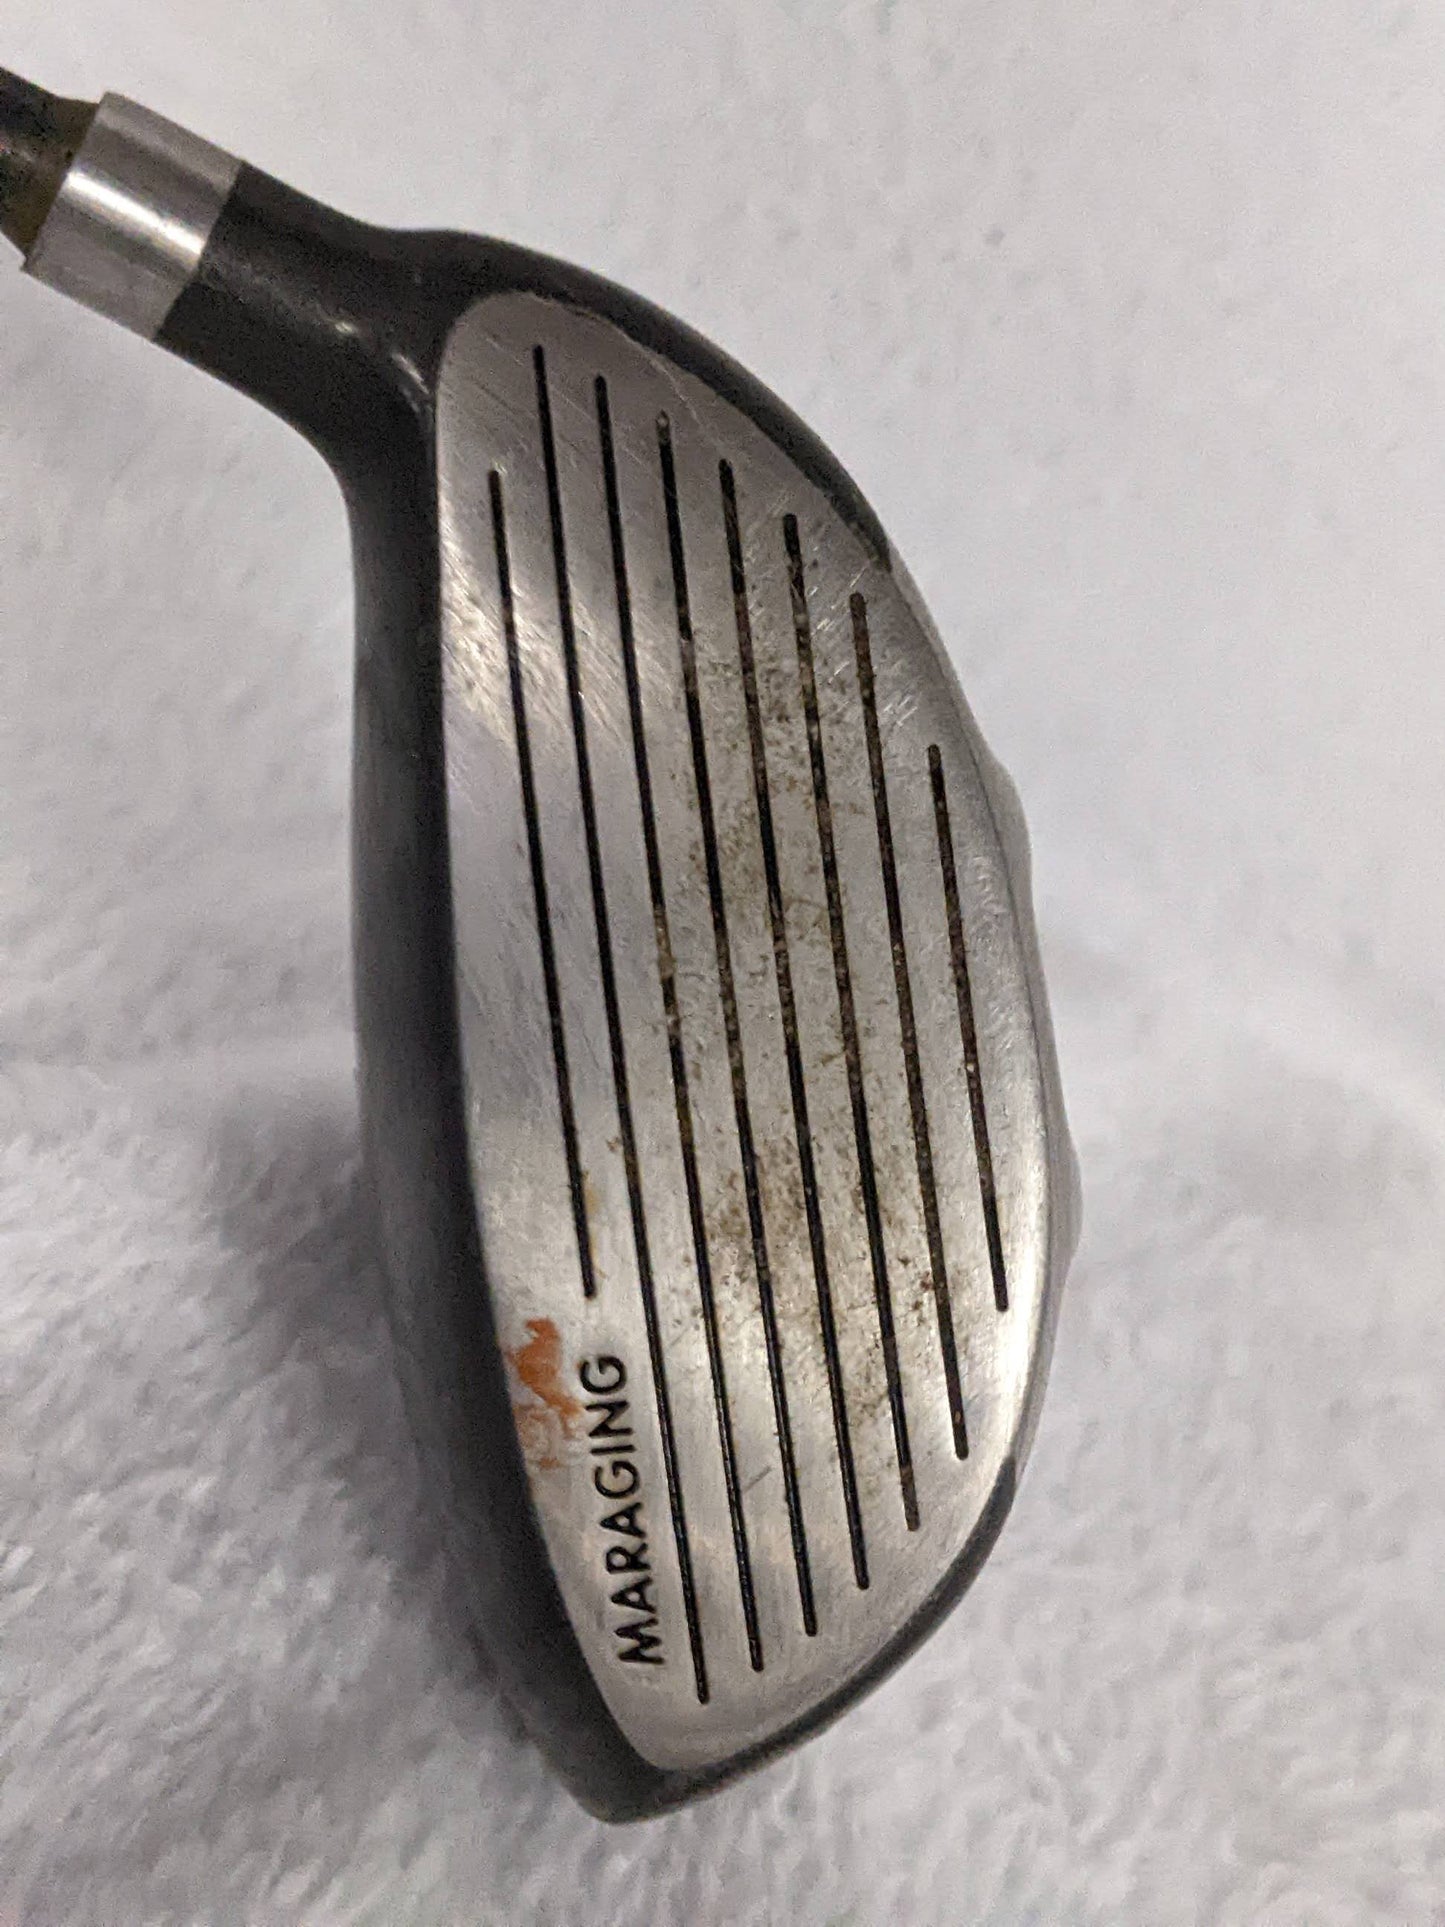 Synchra Maraging 19 Deg Driver Golf Club (RH) Size 43 In Color Black Condition Used